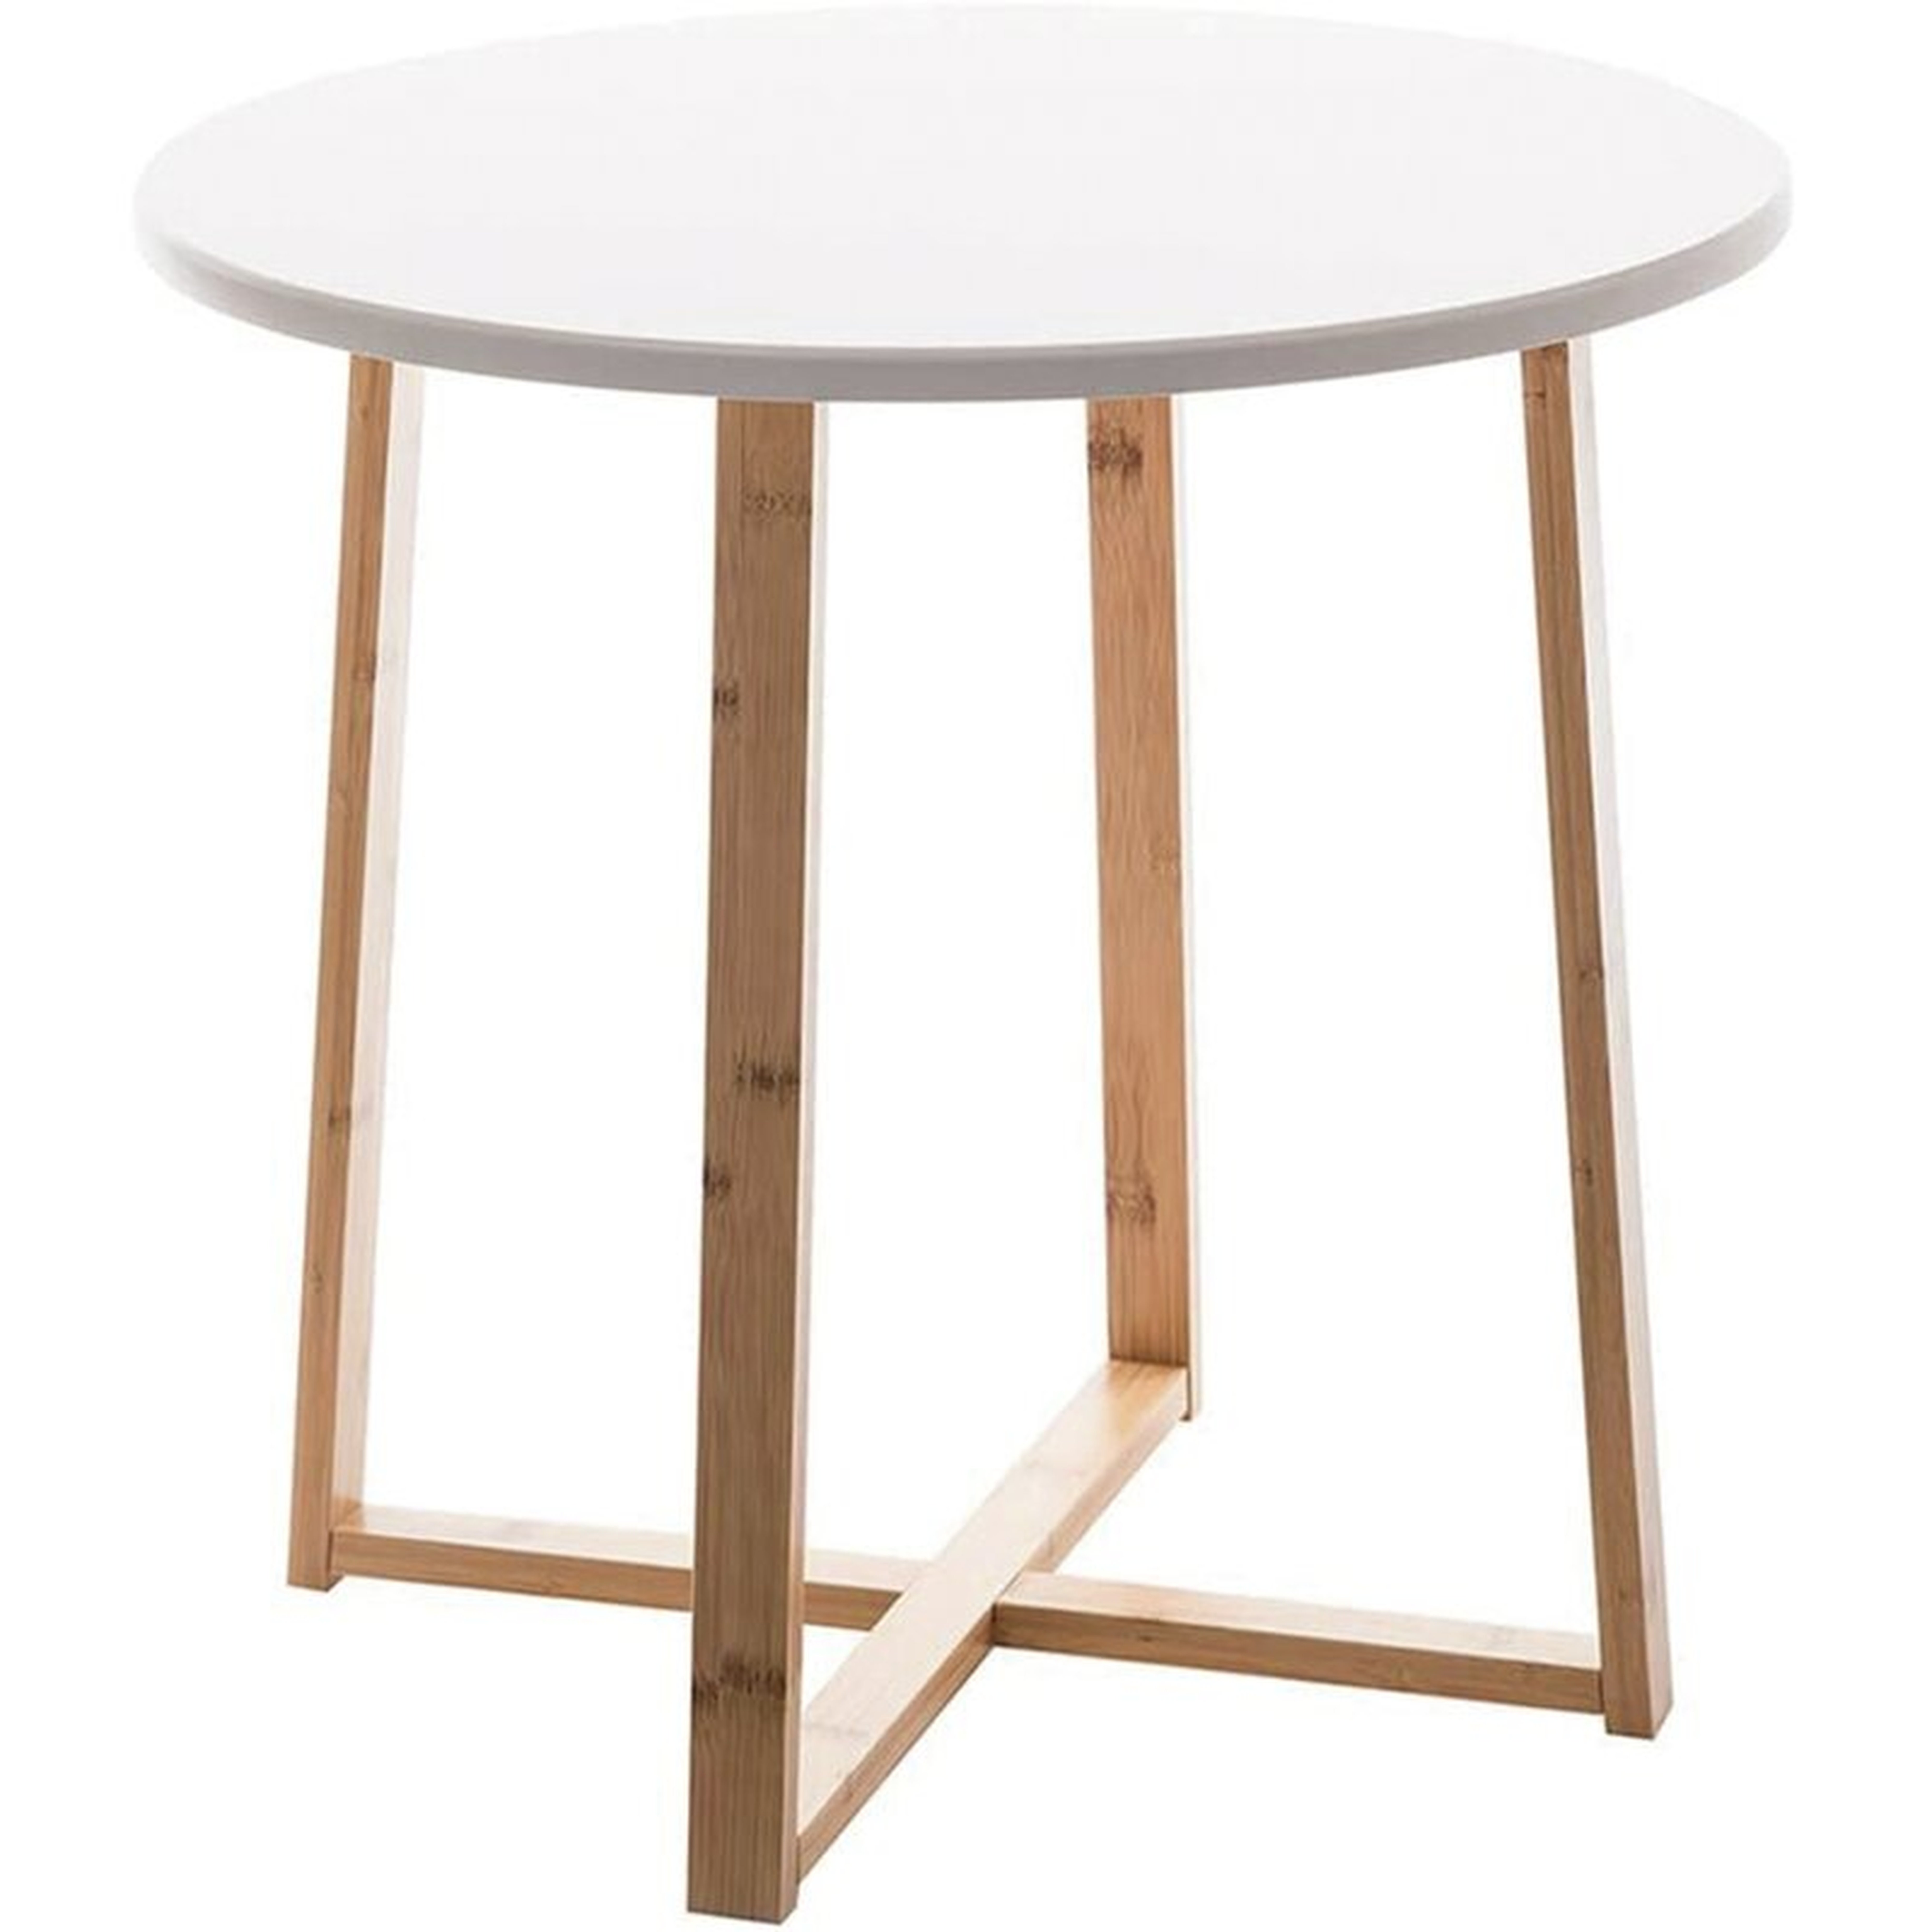 George Oliver Side Table, White - Wayfair